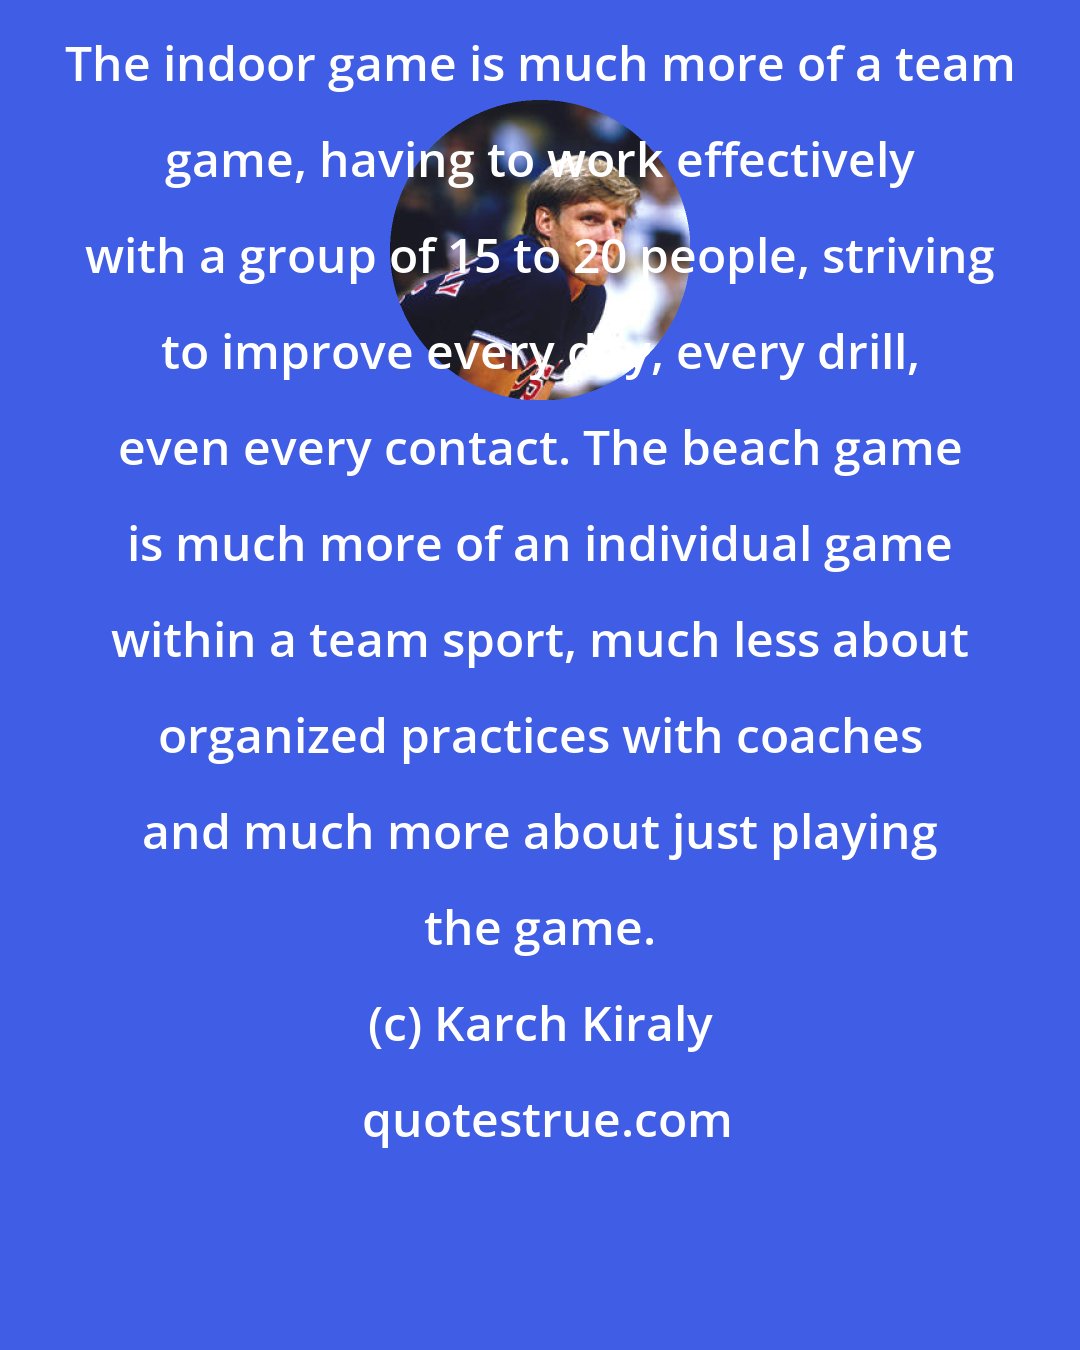 Karch Kiraly: The indoor game is much more of a team game, having to work effectively with a group of 15 to 20 people, striving to improve every day, every drill, even every contact. The beach game is much more of an individual game within a team sport, much less about organized practices with coaches and much more about just playing the game.